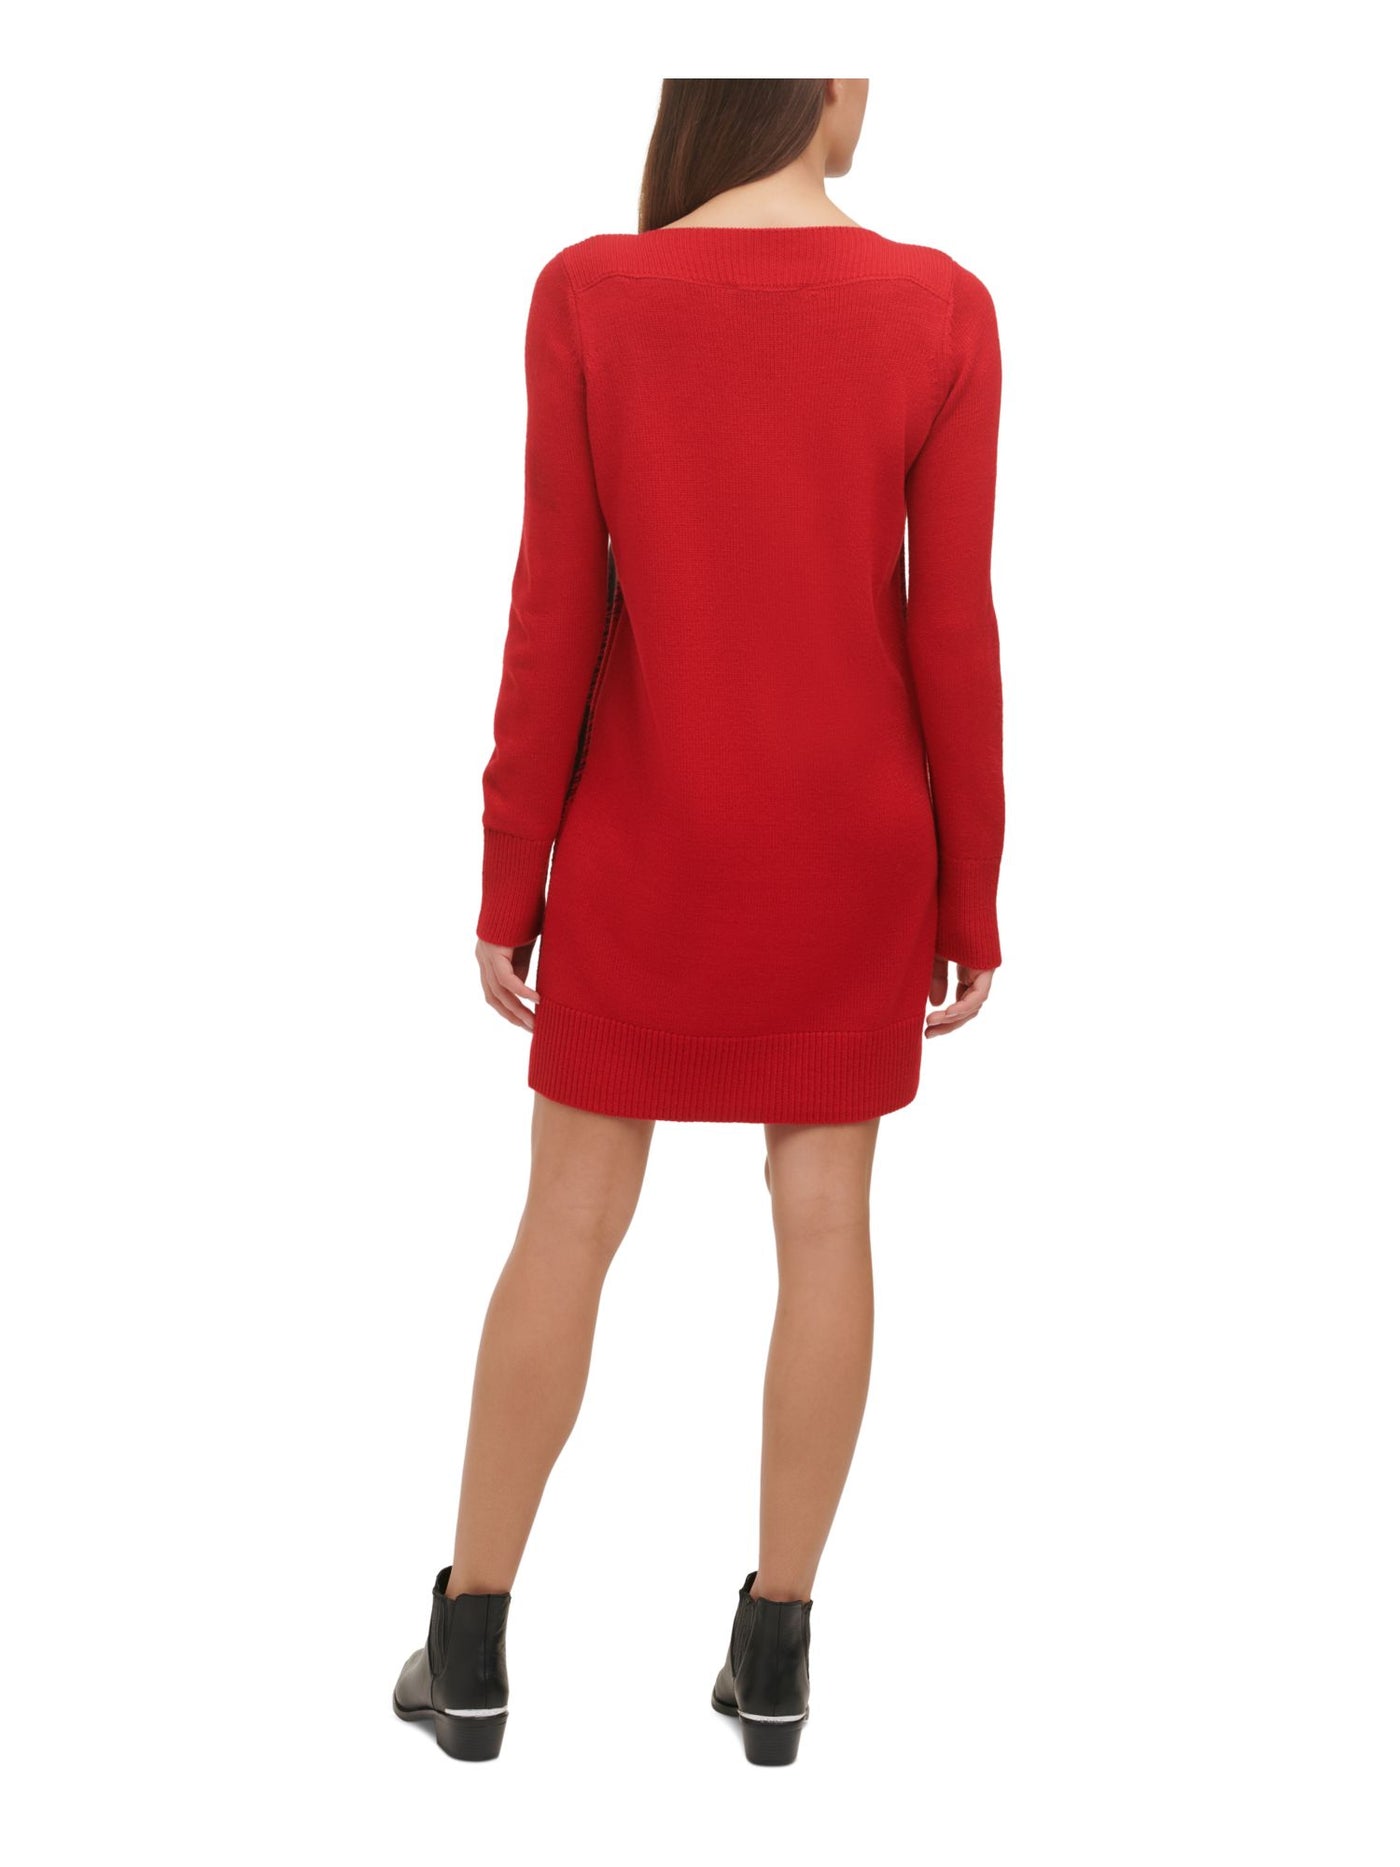 TOMMY HILFIGER Womens Red Stretch Ribbed Textured Unlined Pullover Styling Long Sleeve Boat Neck Above The Knee Wear To Work Sweater Dress M